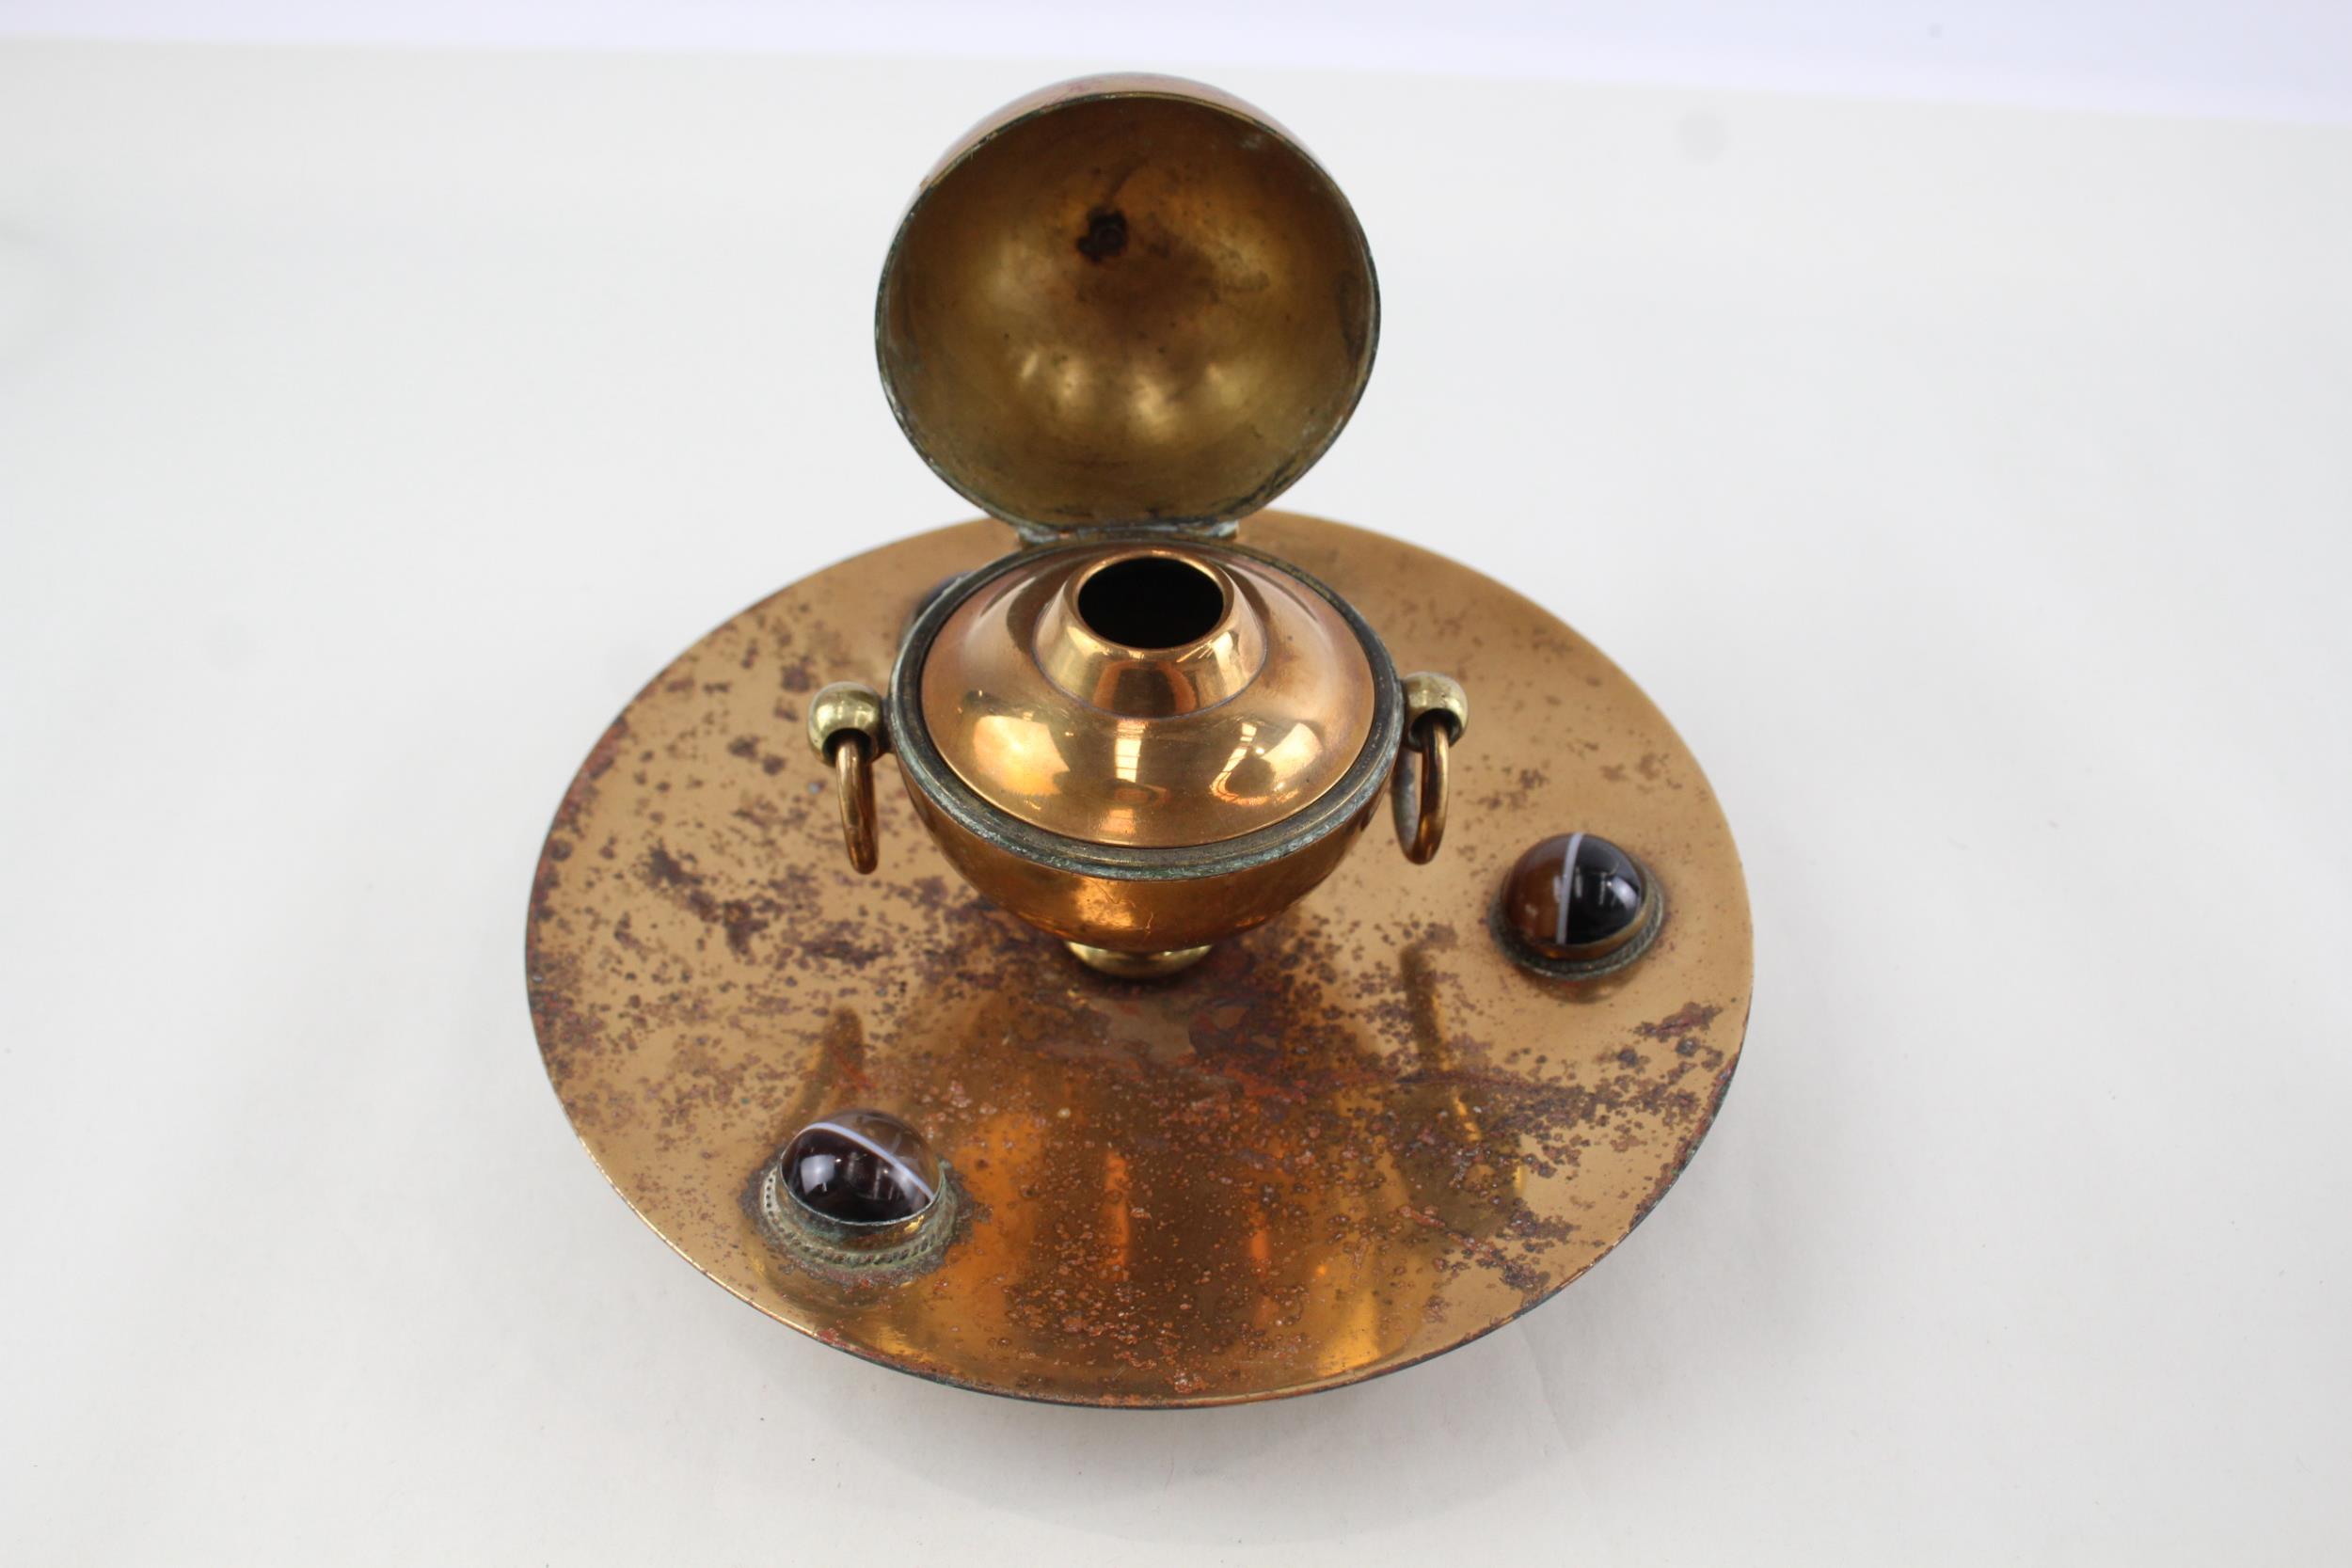 Antique ARTS & CRAFTS Brass Circular Inkwell w/ Tiger's Eye Cabochons - Diameter - 16.5cm In antique - Image 5 of 9